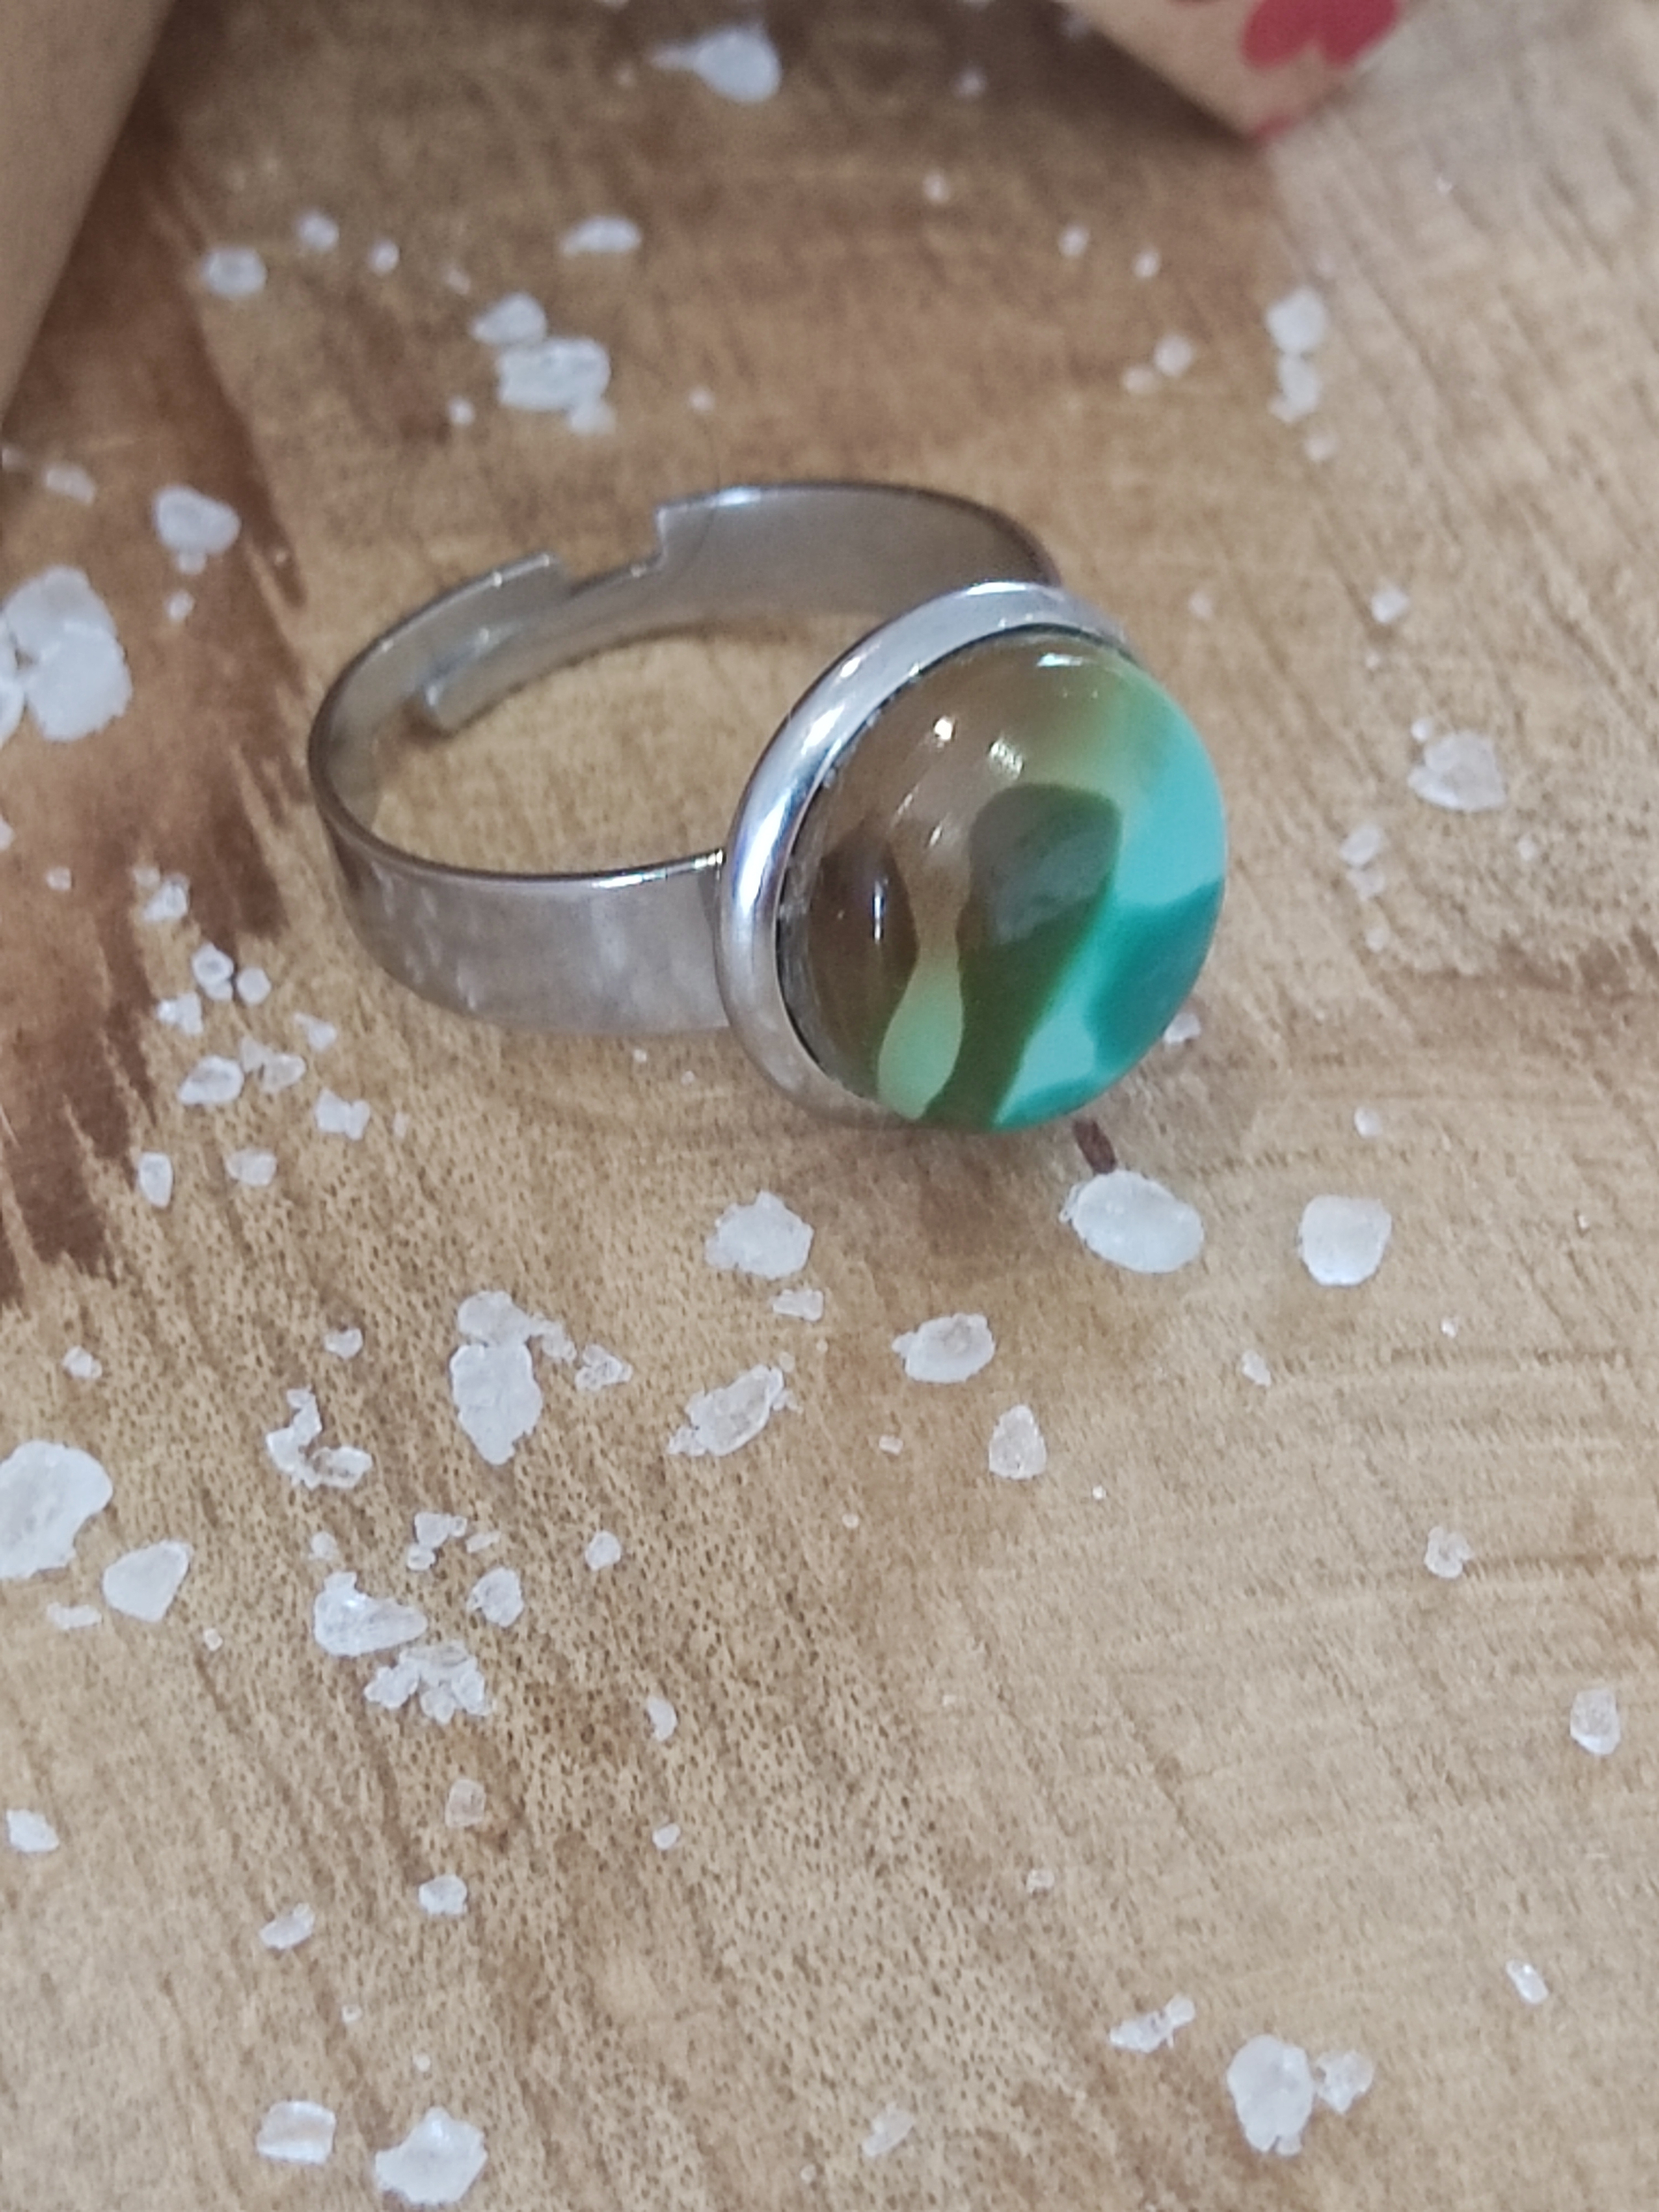 Bague 12mm Turquoise 3